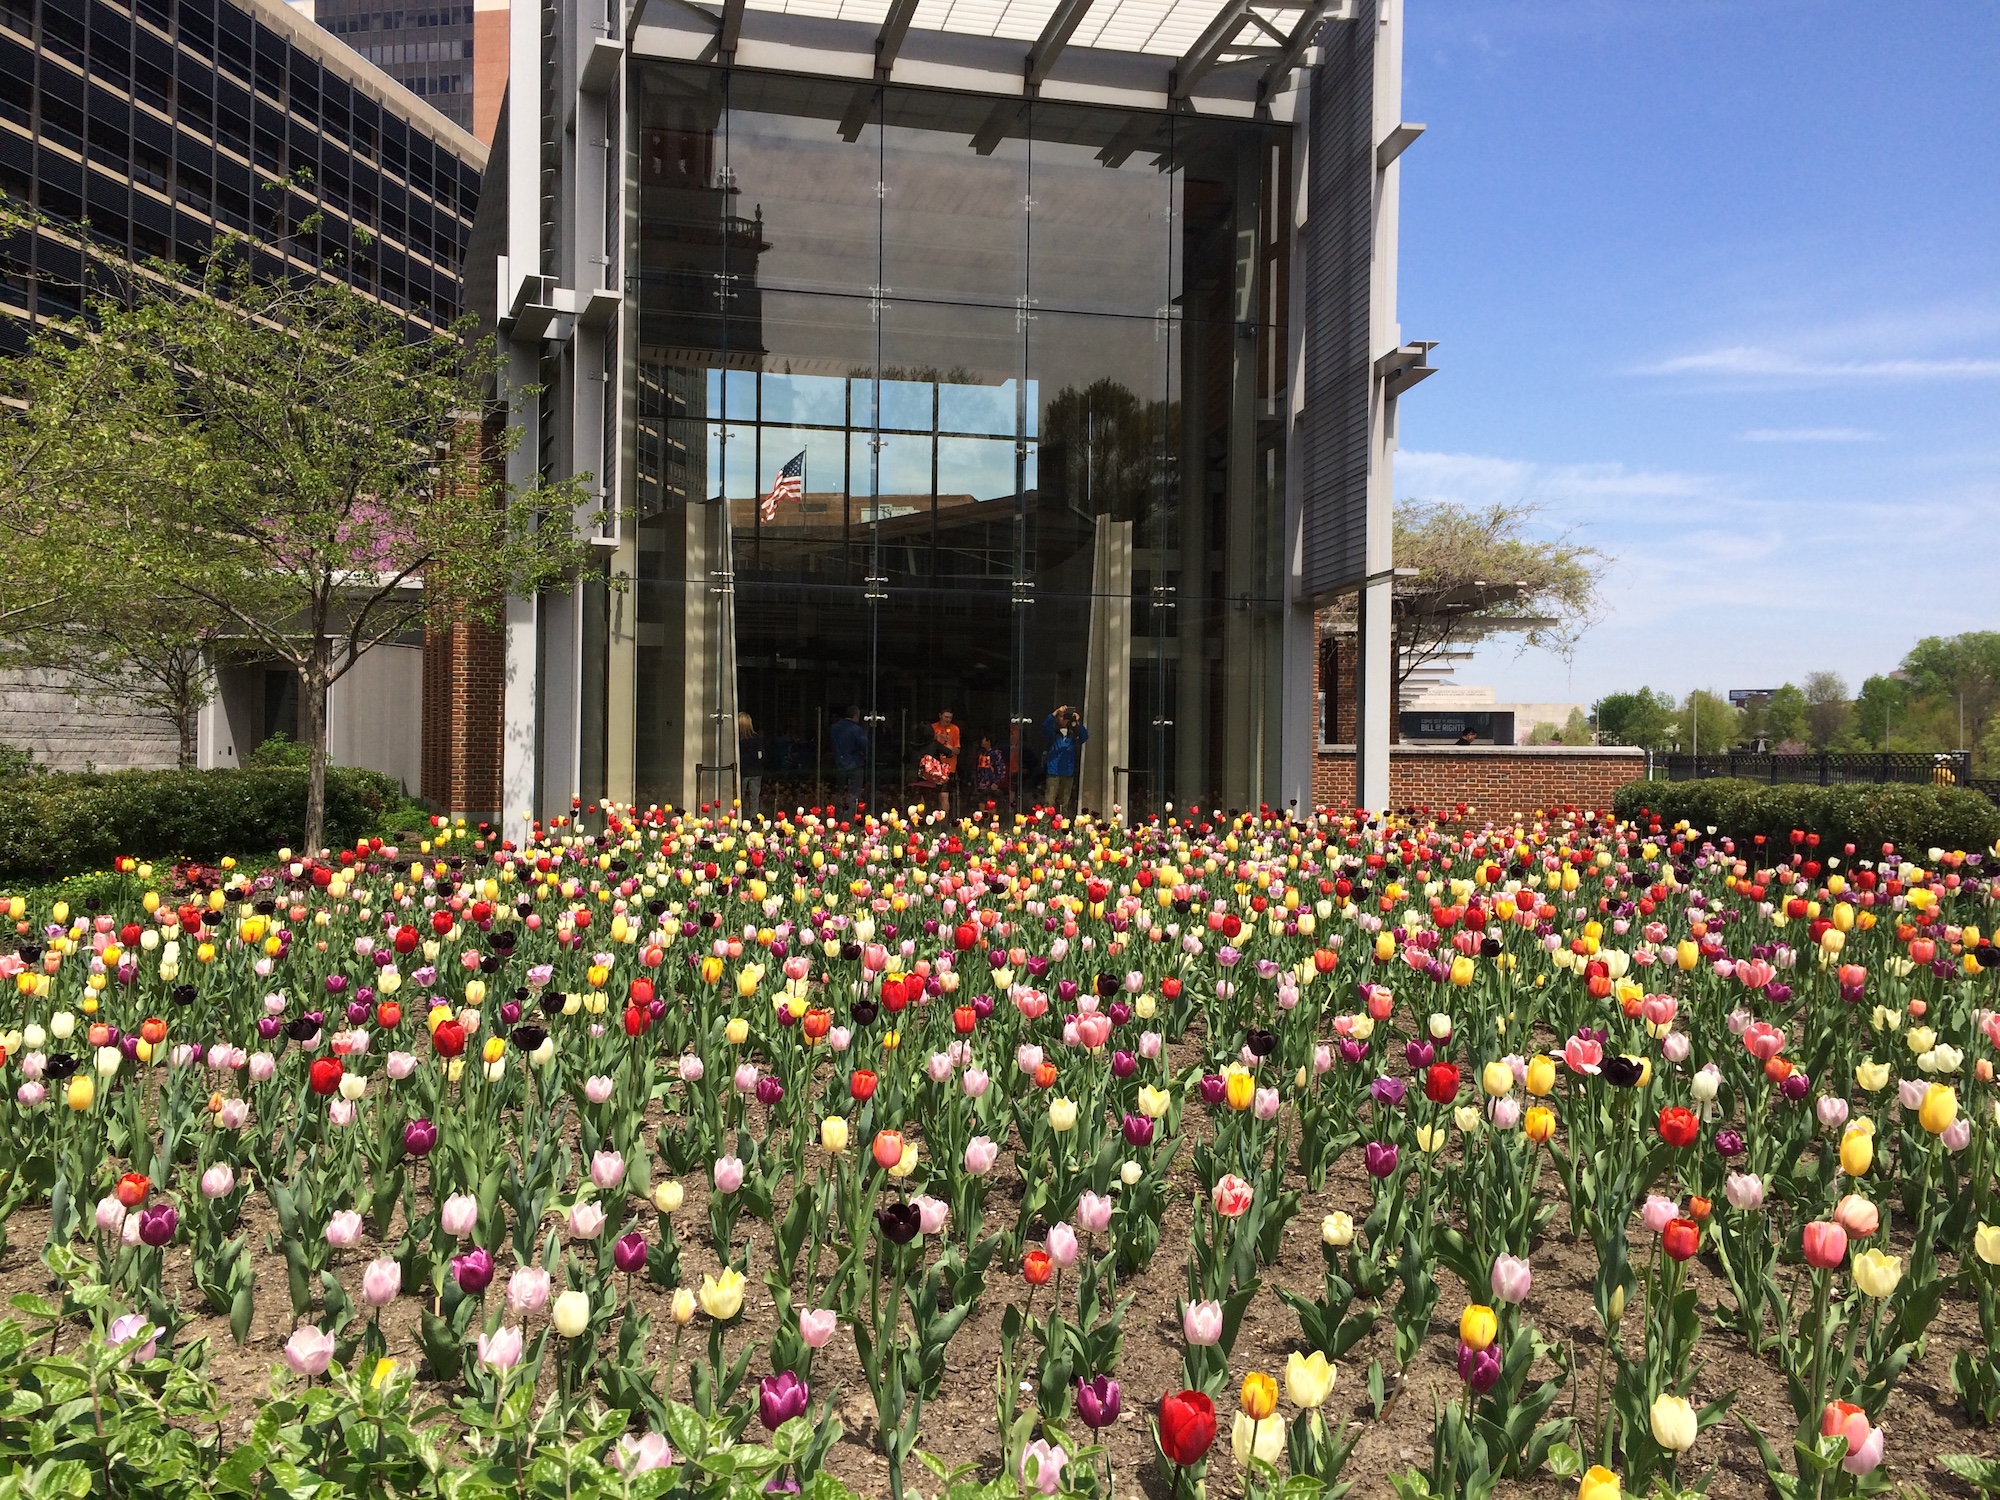 The Liberty Bell Tulips